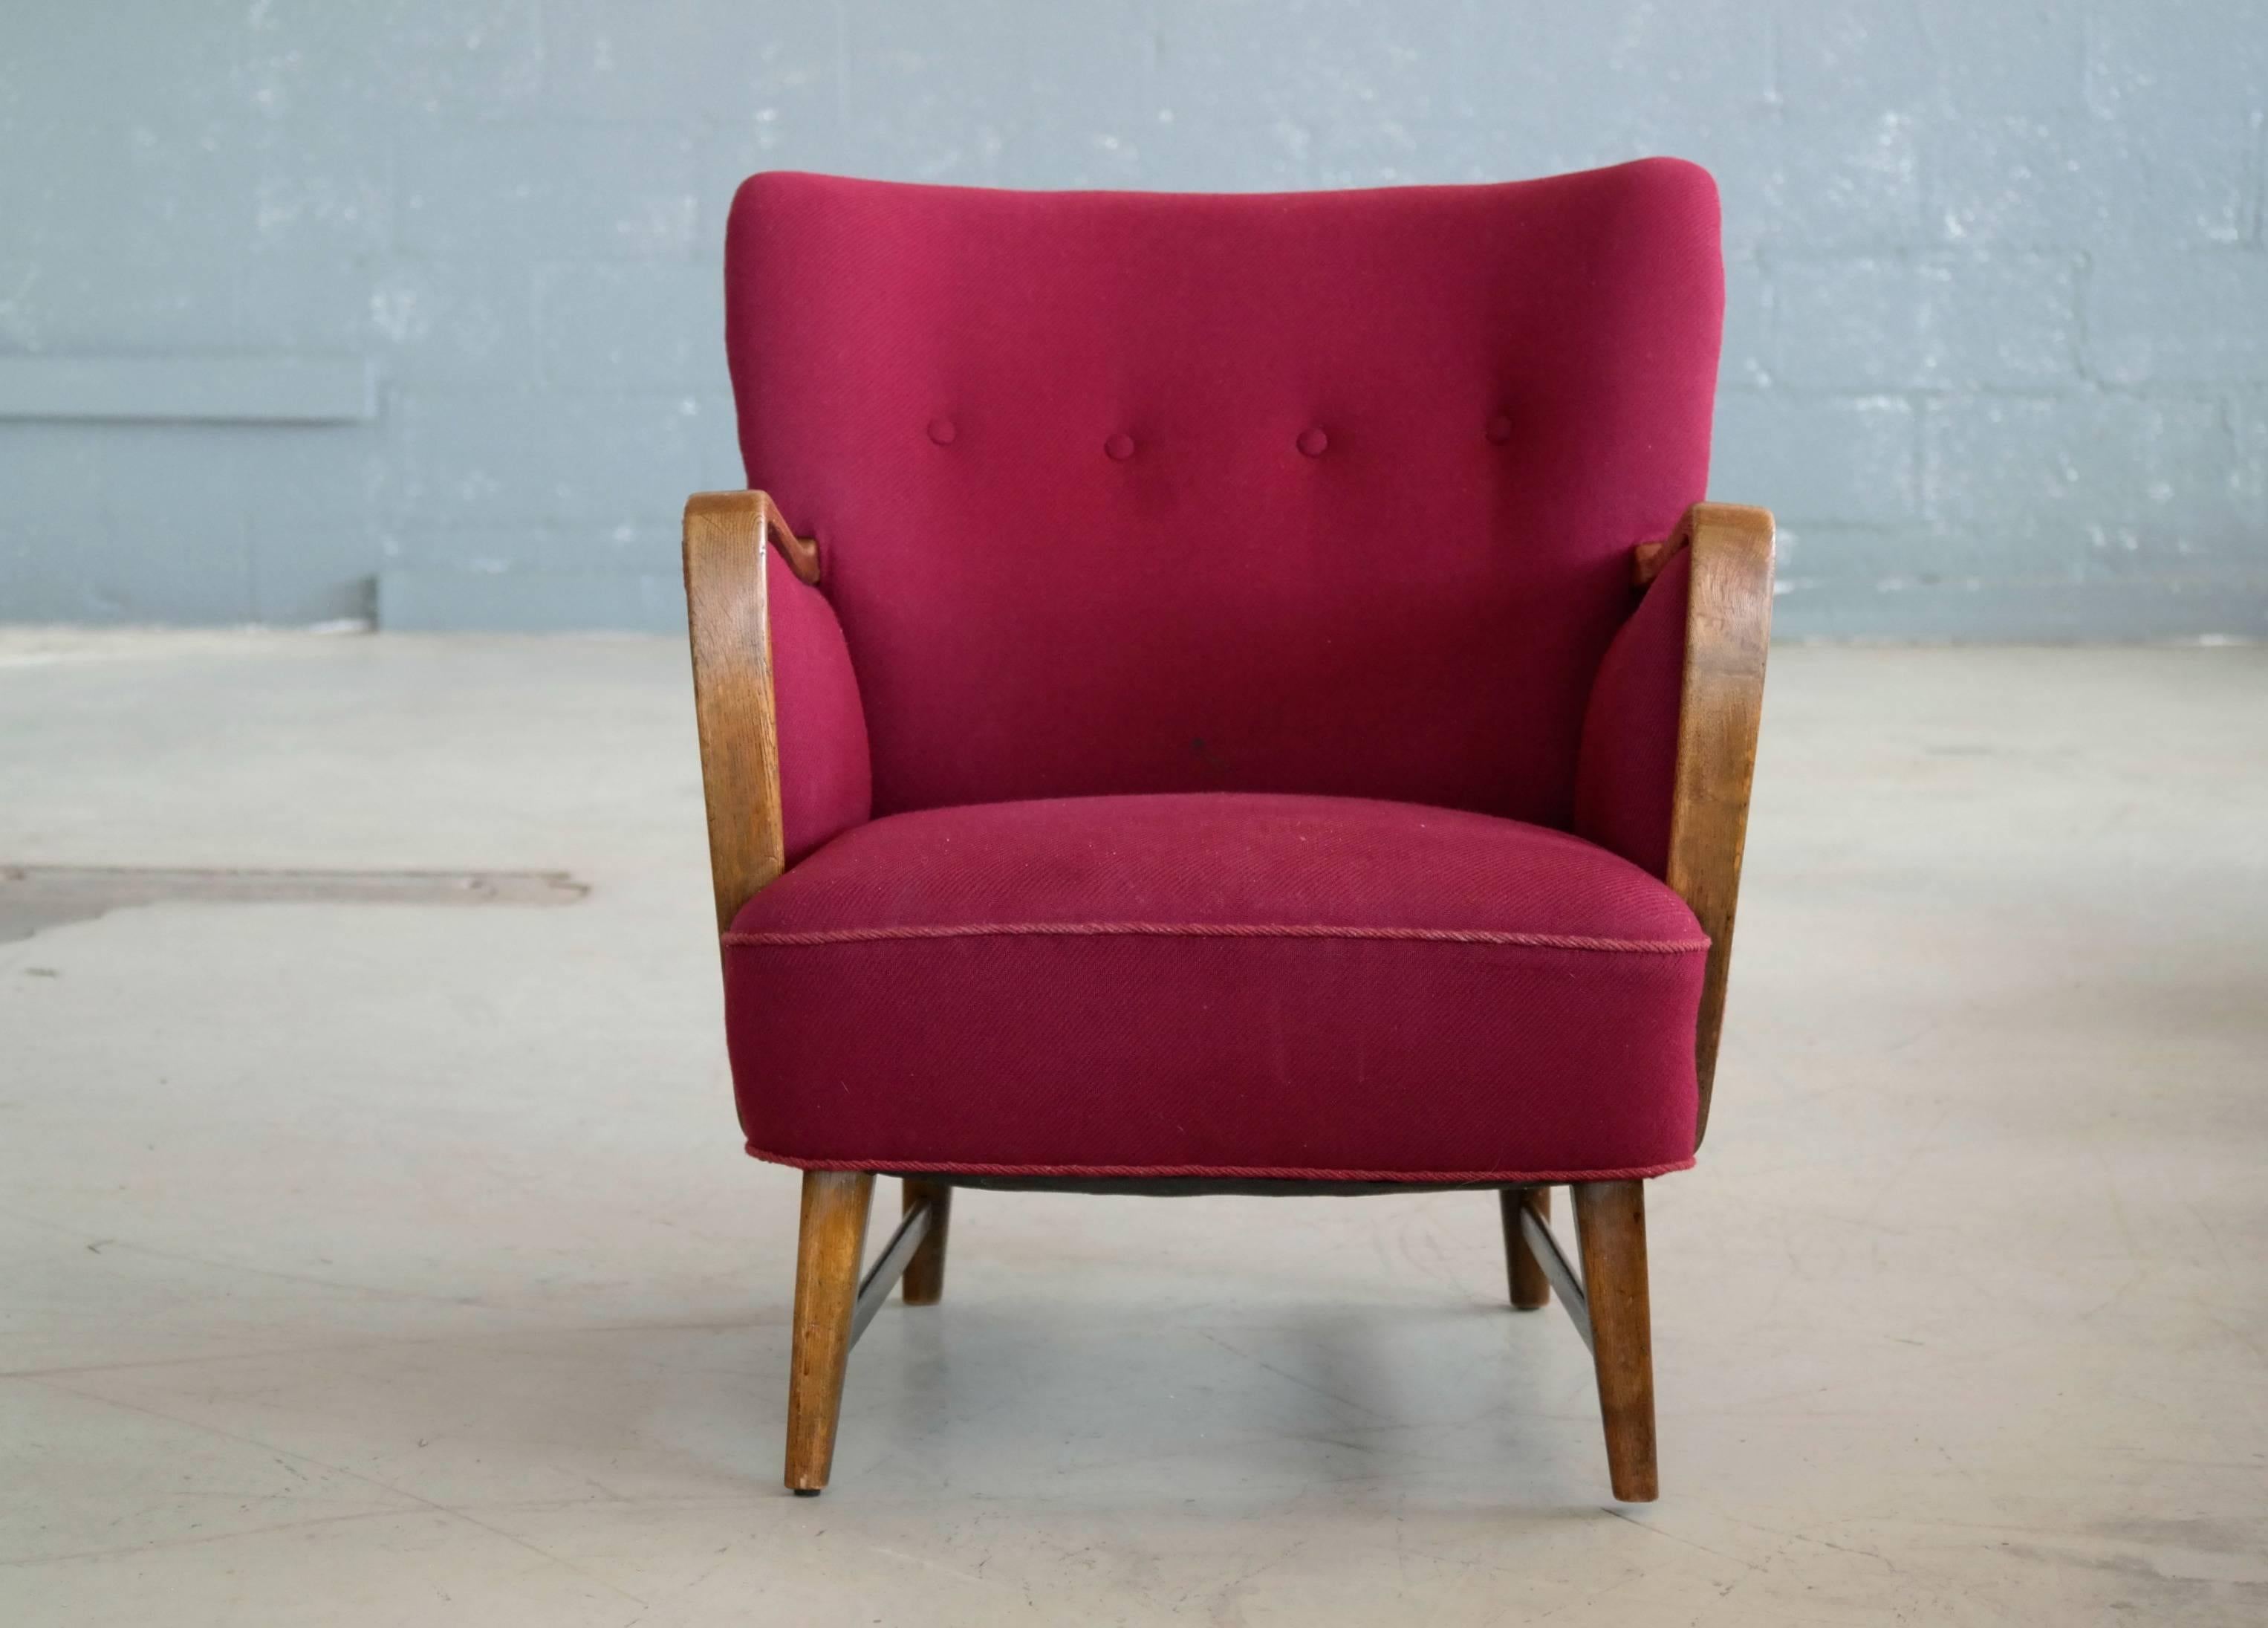 Super charming 1950s lounge chair in a magenta colored wool with armrests and base in a nice golden solid oak. Designed by Kurt Olsen around 1950 for N.A. Jorgensen. N.A. Jorgensen became known as Bramin Mobler in 1958 well known for making